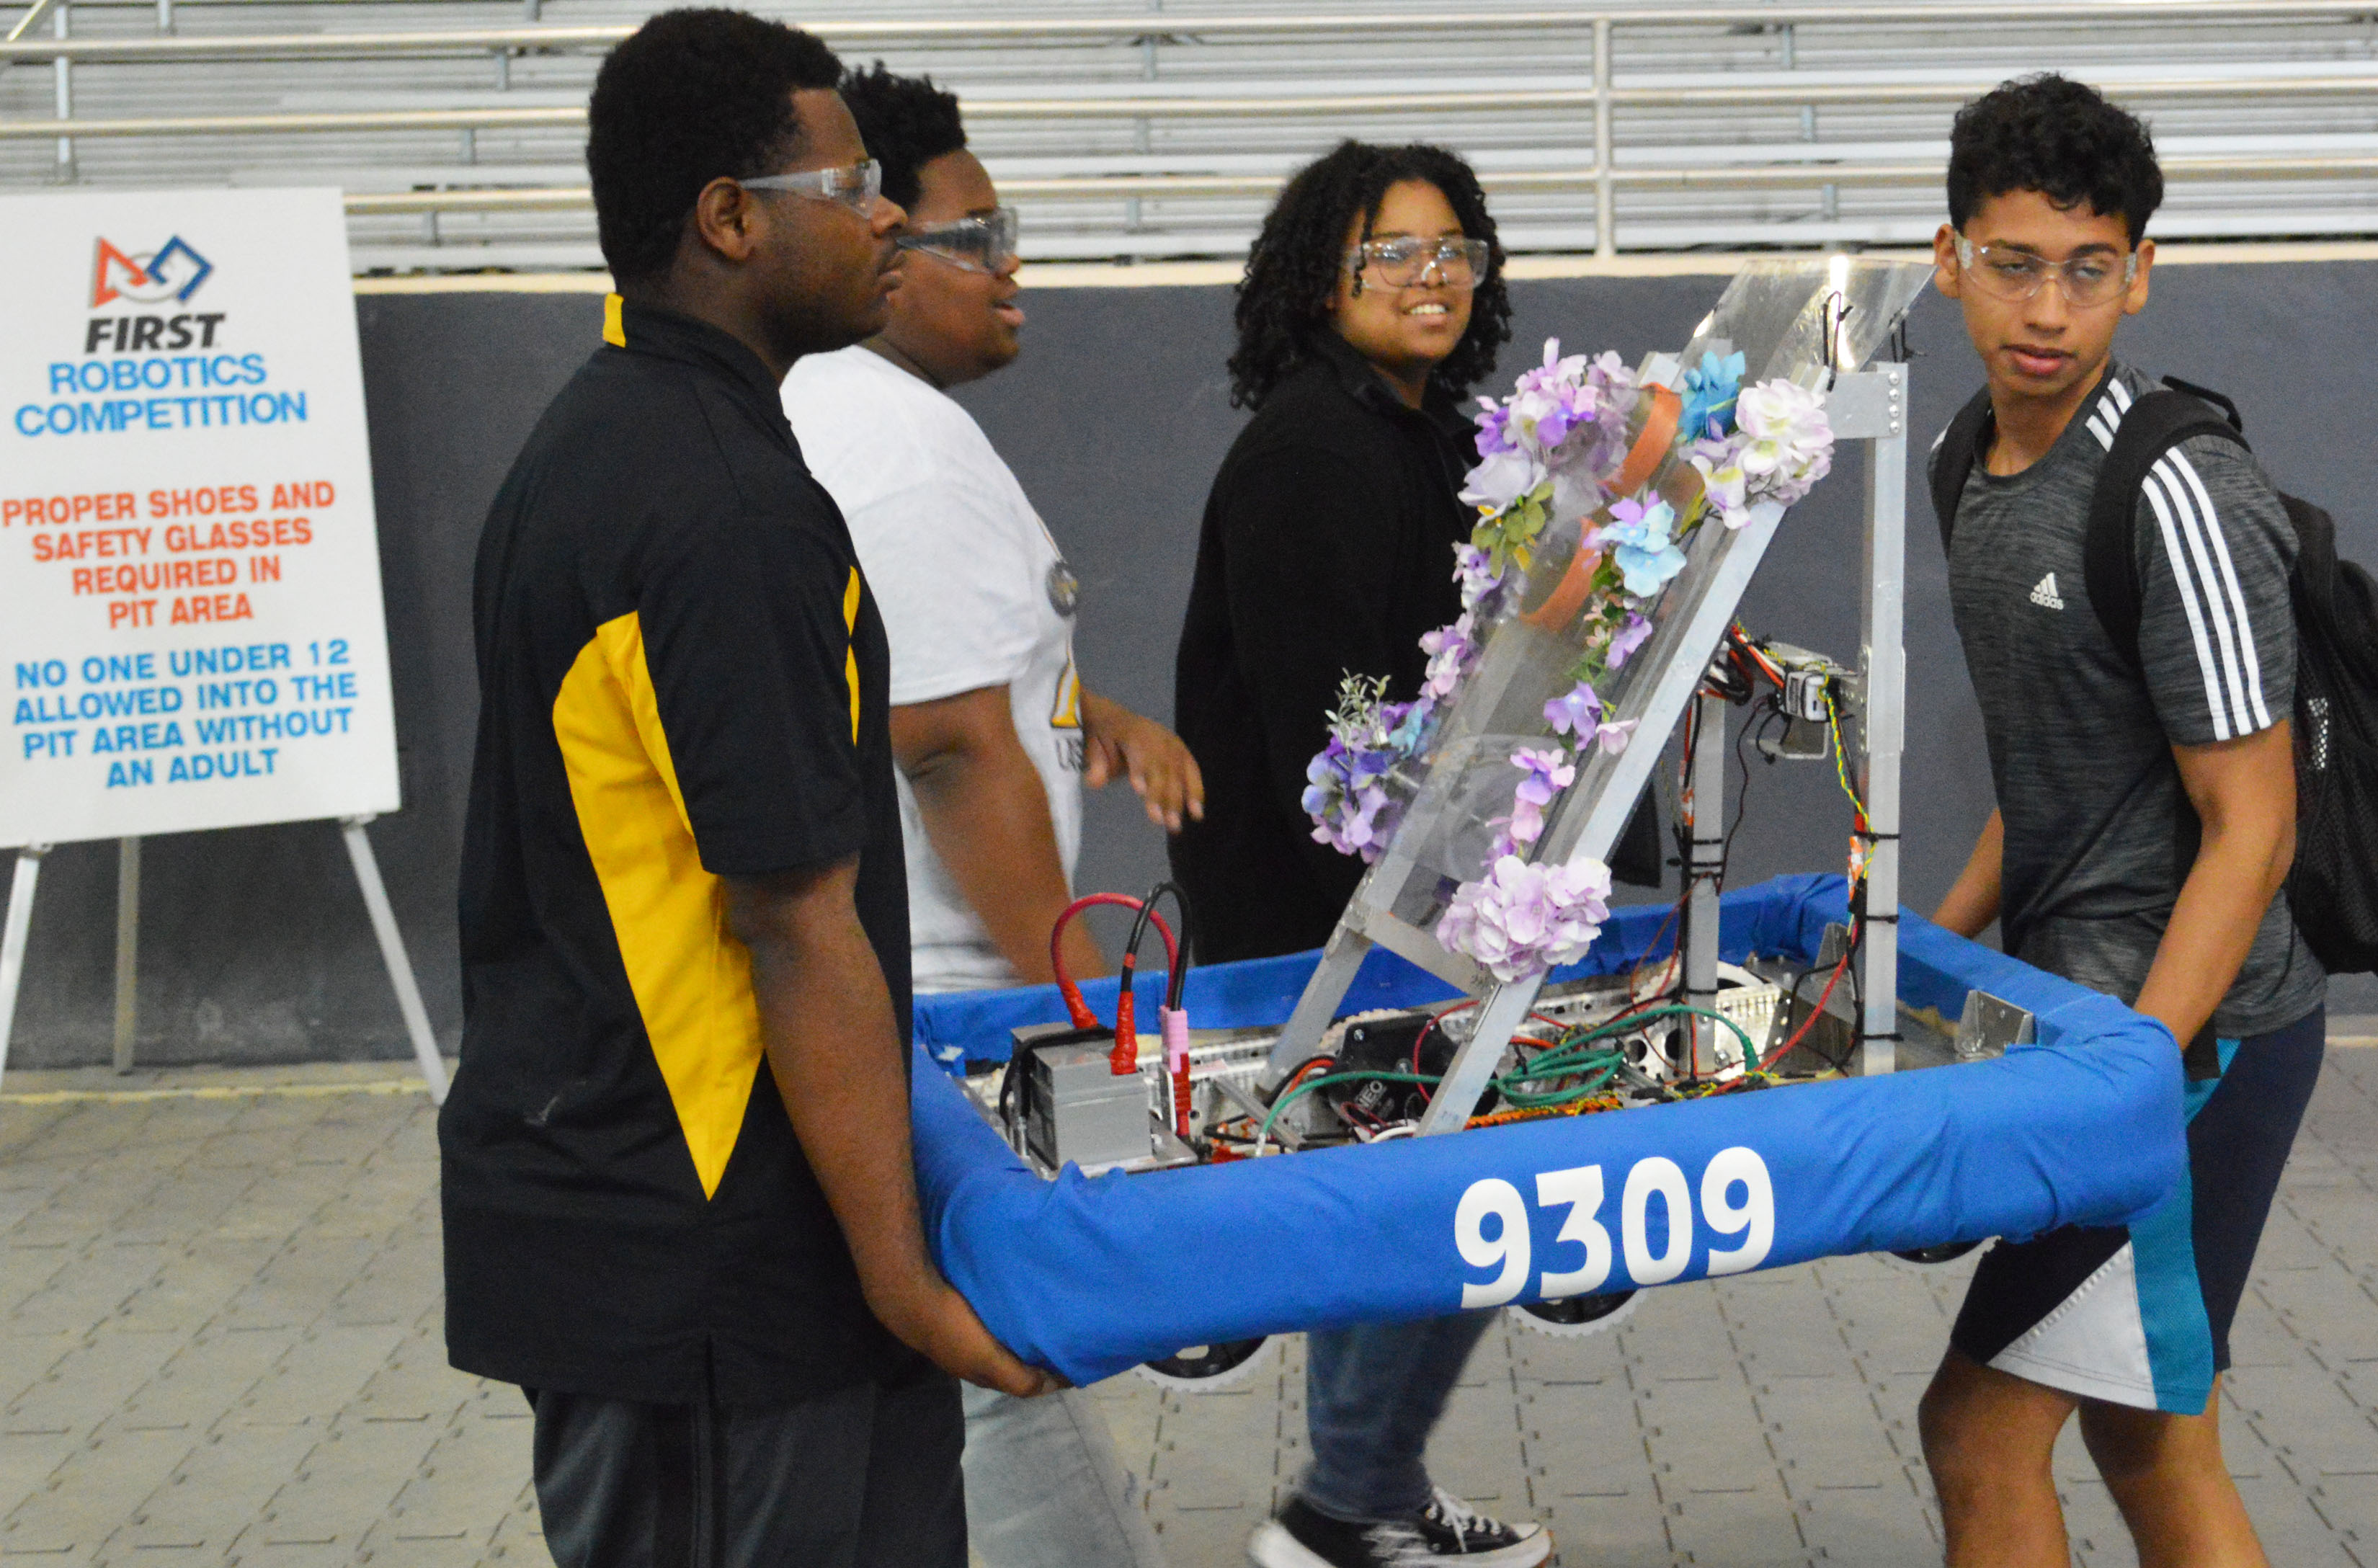 a team escorts their robot to the competition floor